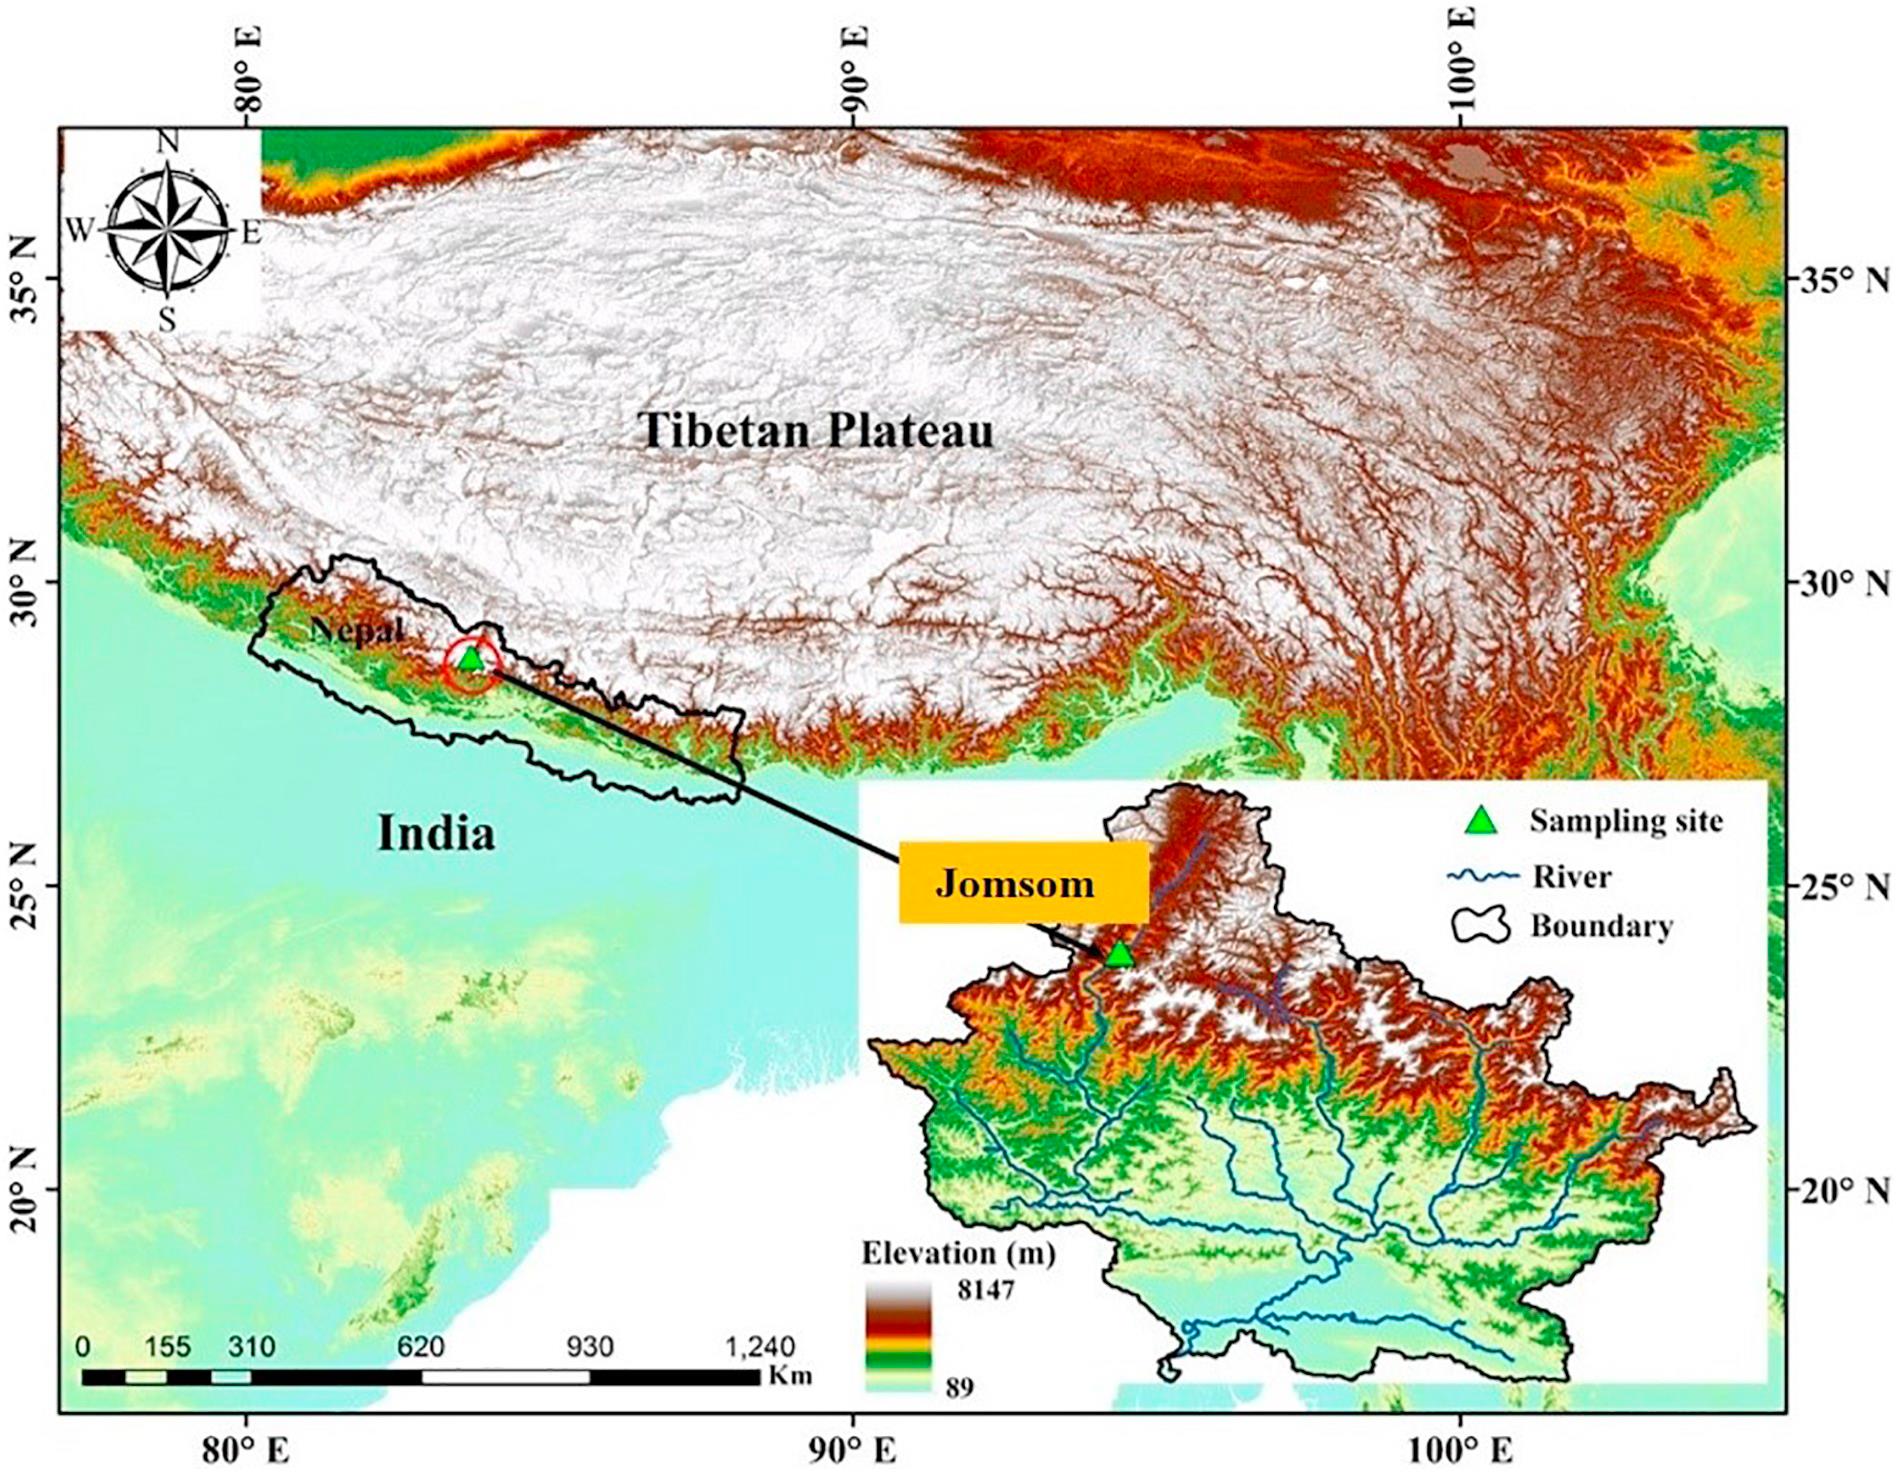 Scientists Analyze the Components and Sources of Pollutants in Wet Deposition at the Central Himalaya